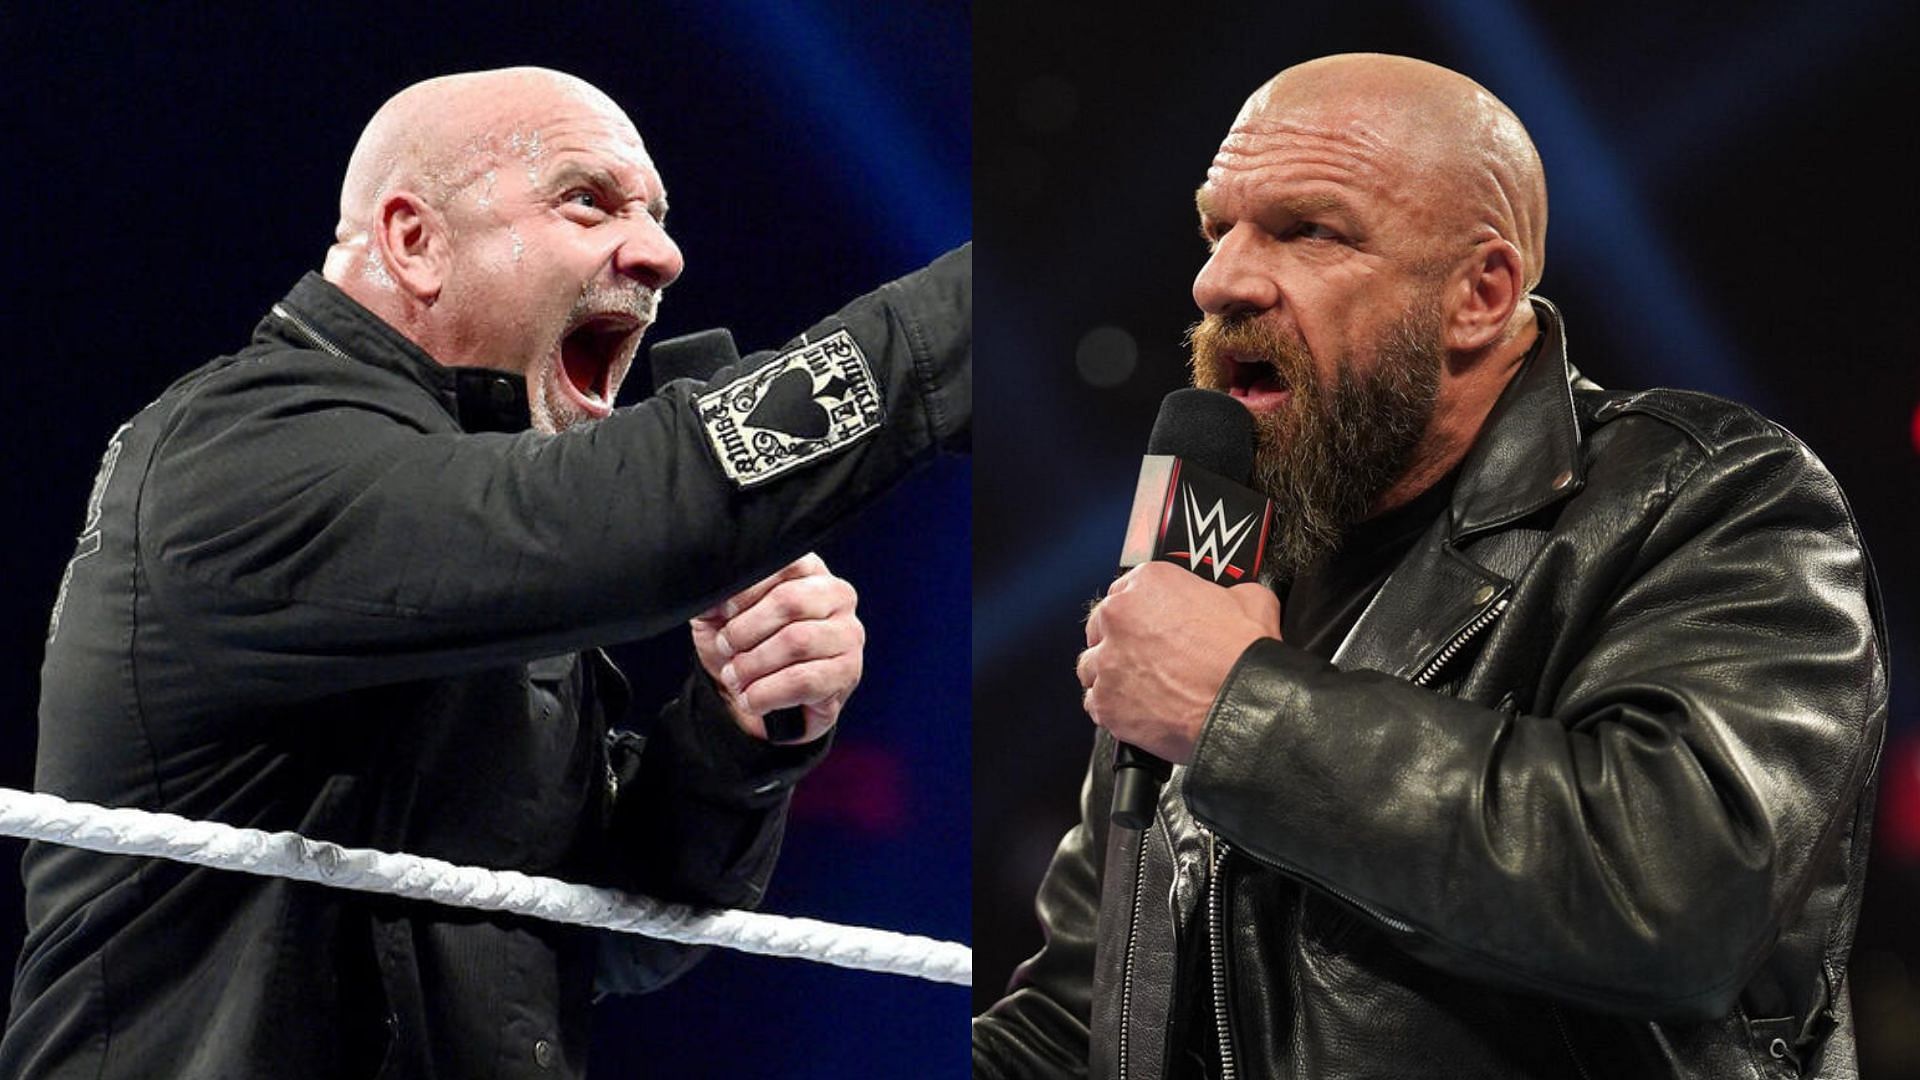 Triple H and Goldberg feuded in 2003 on Monday Night RAW!